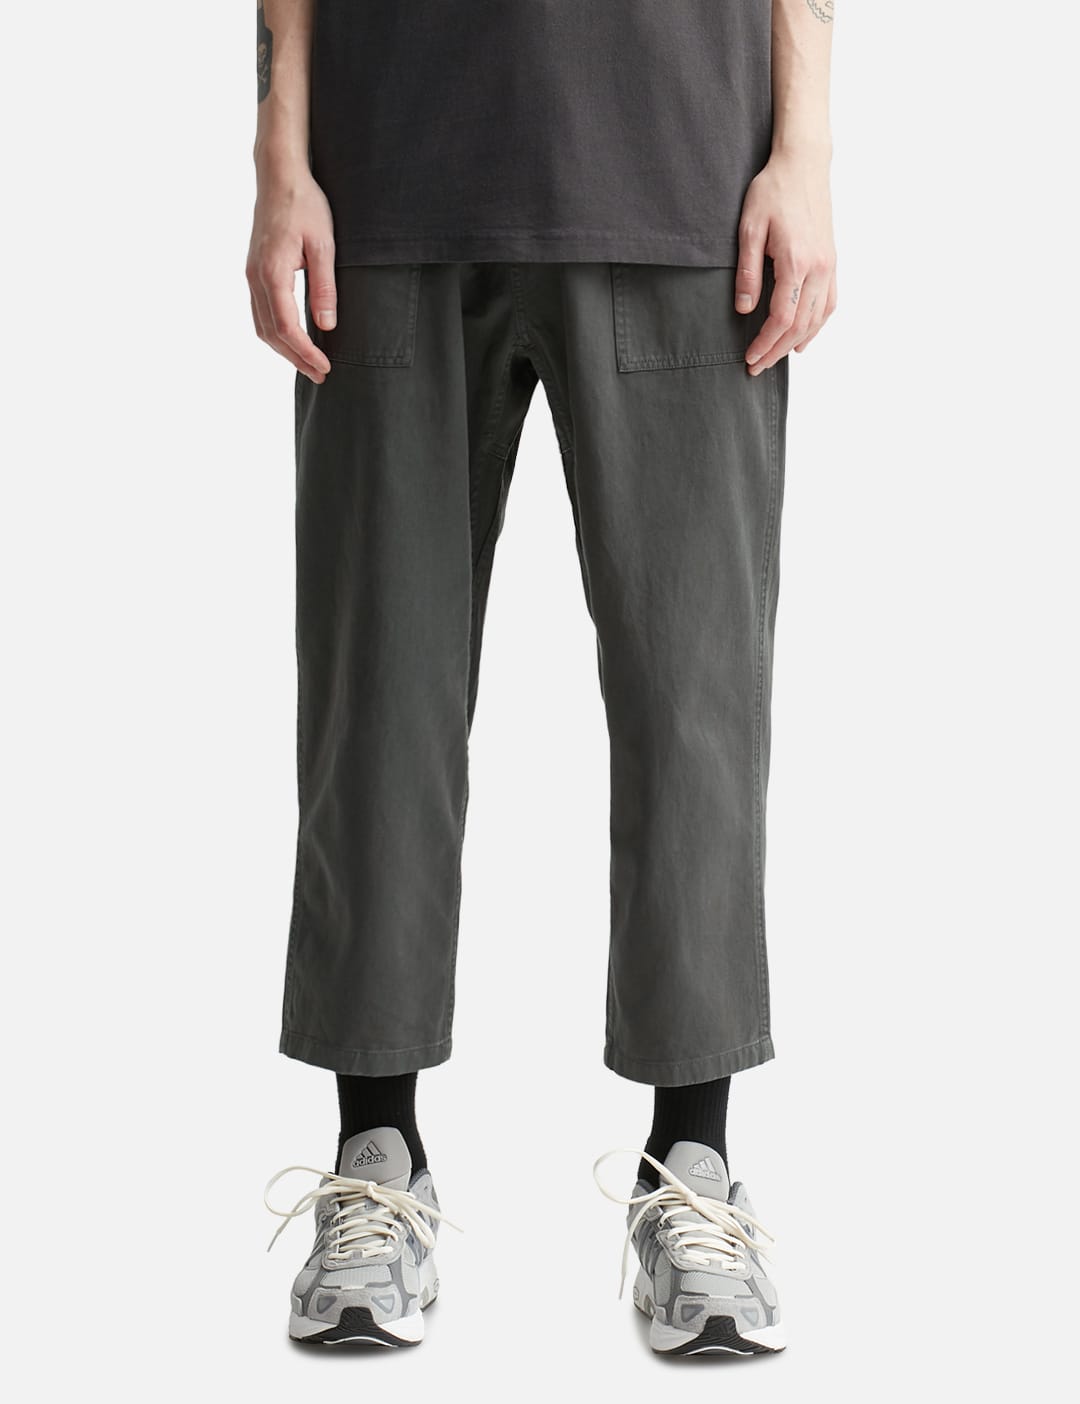 DÔEN Grover pleated cotton-twill tapered pants | NET-A-PORTER